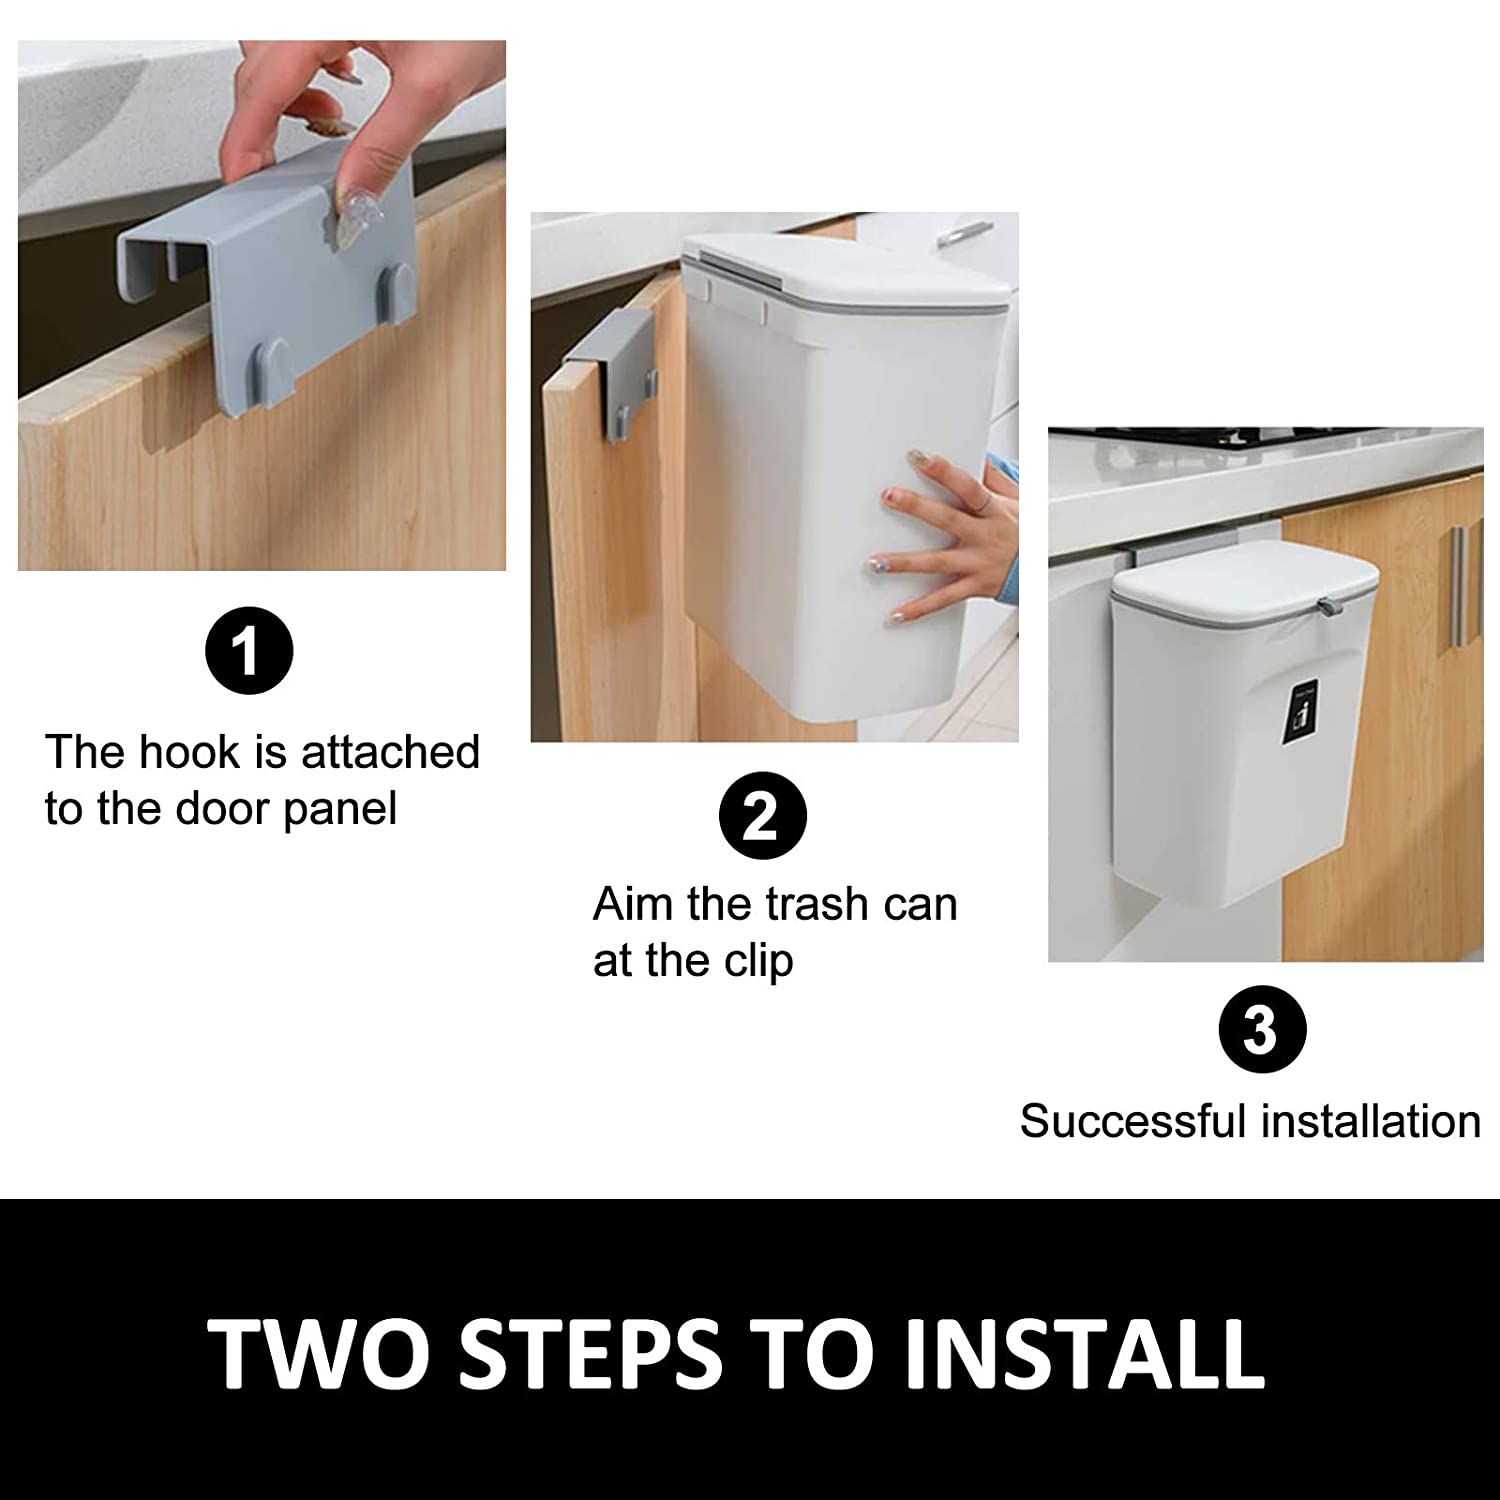 Visual instructions on how to use a kitchen cabinet door wall-mounted hanging trash can